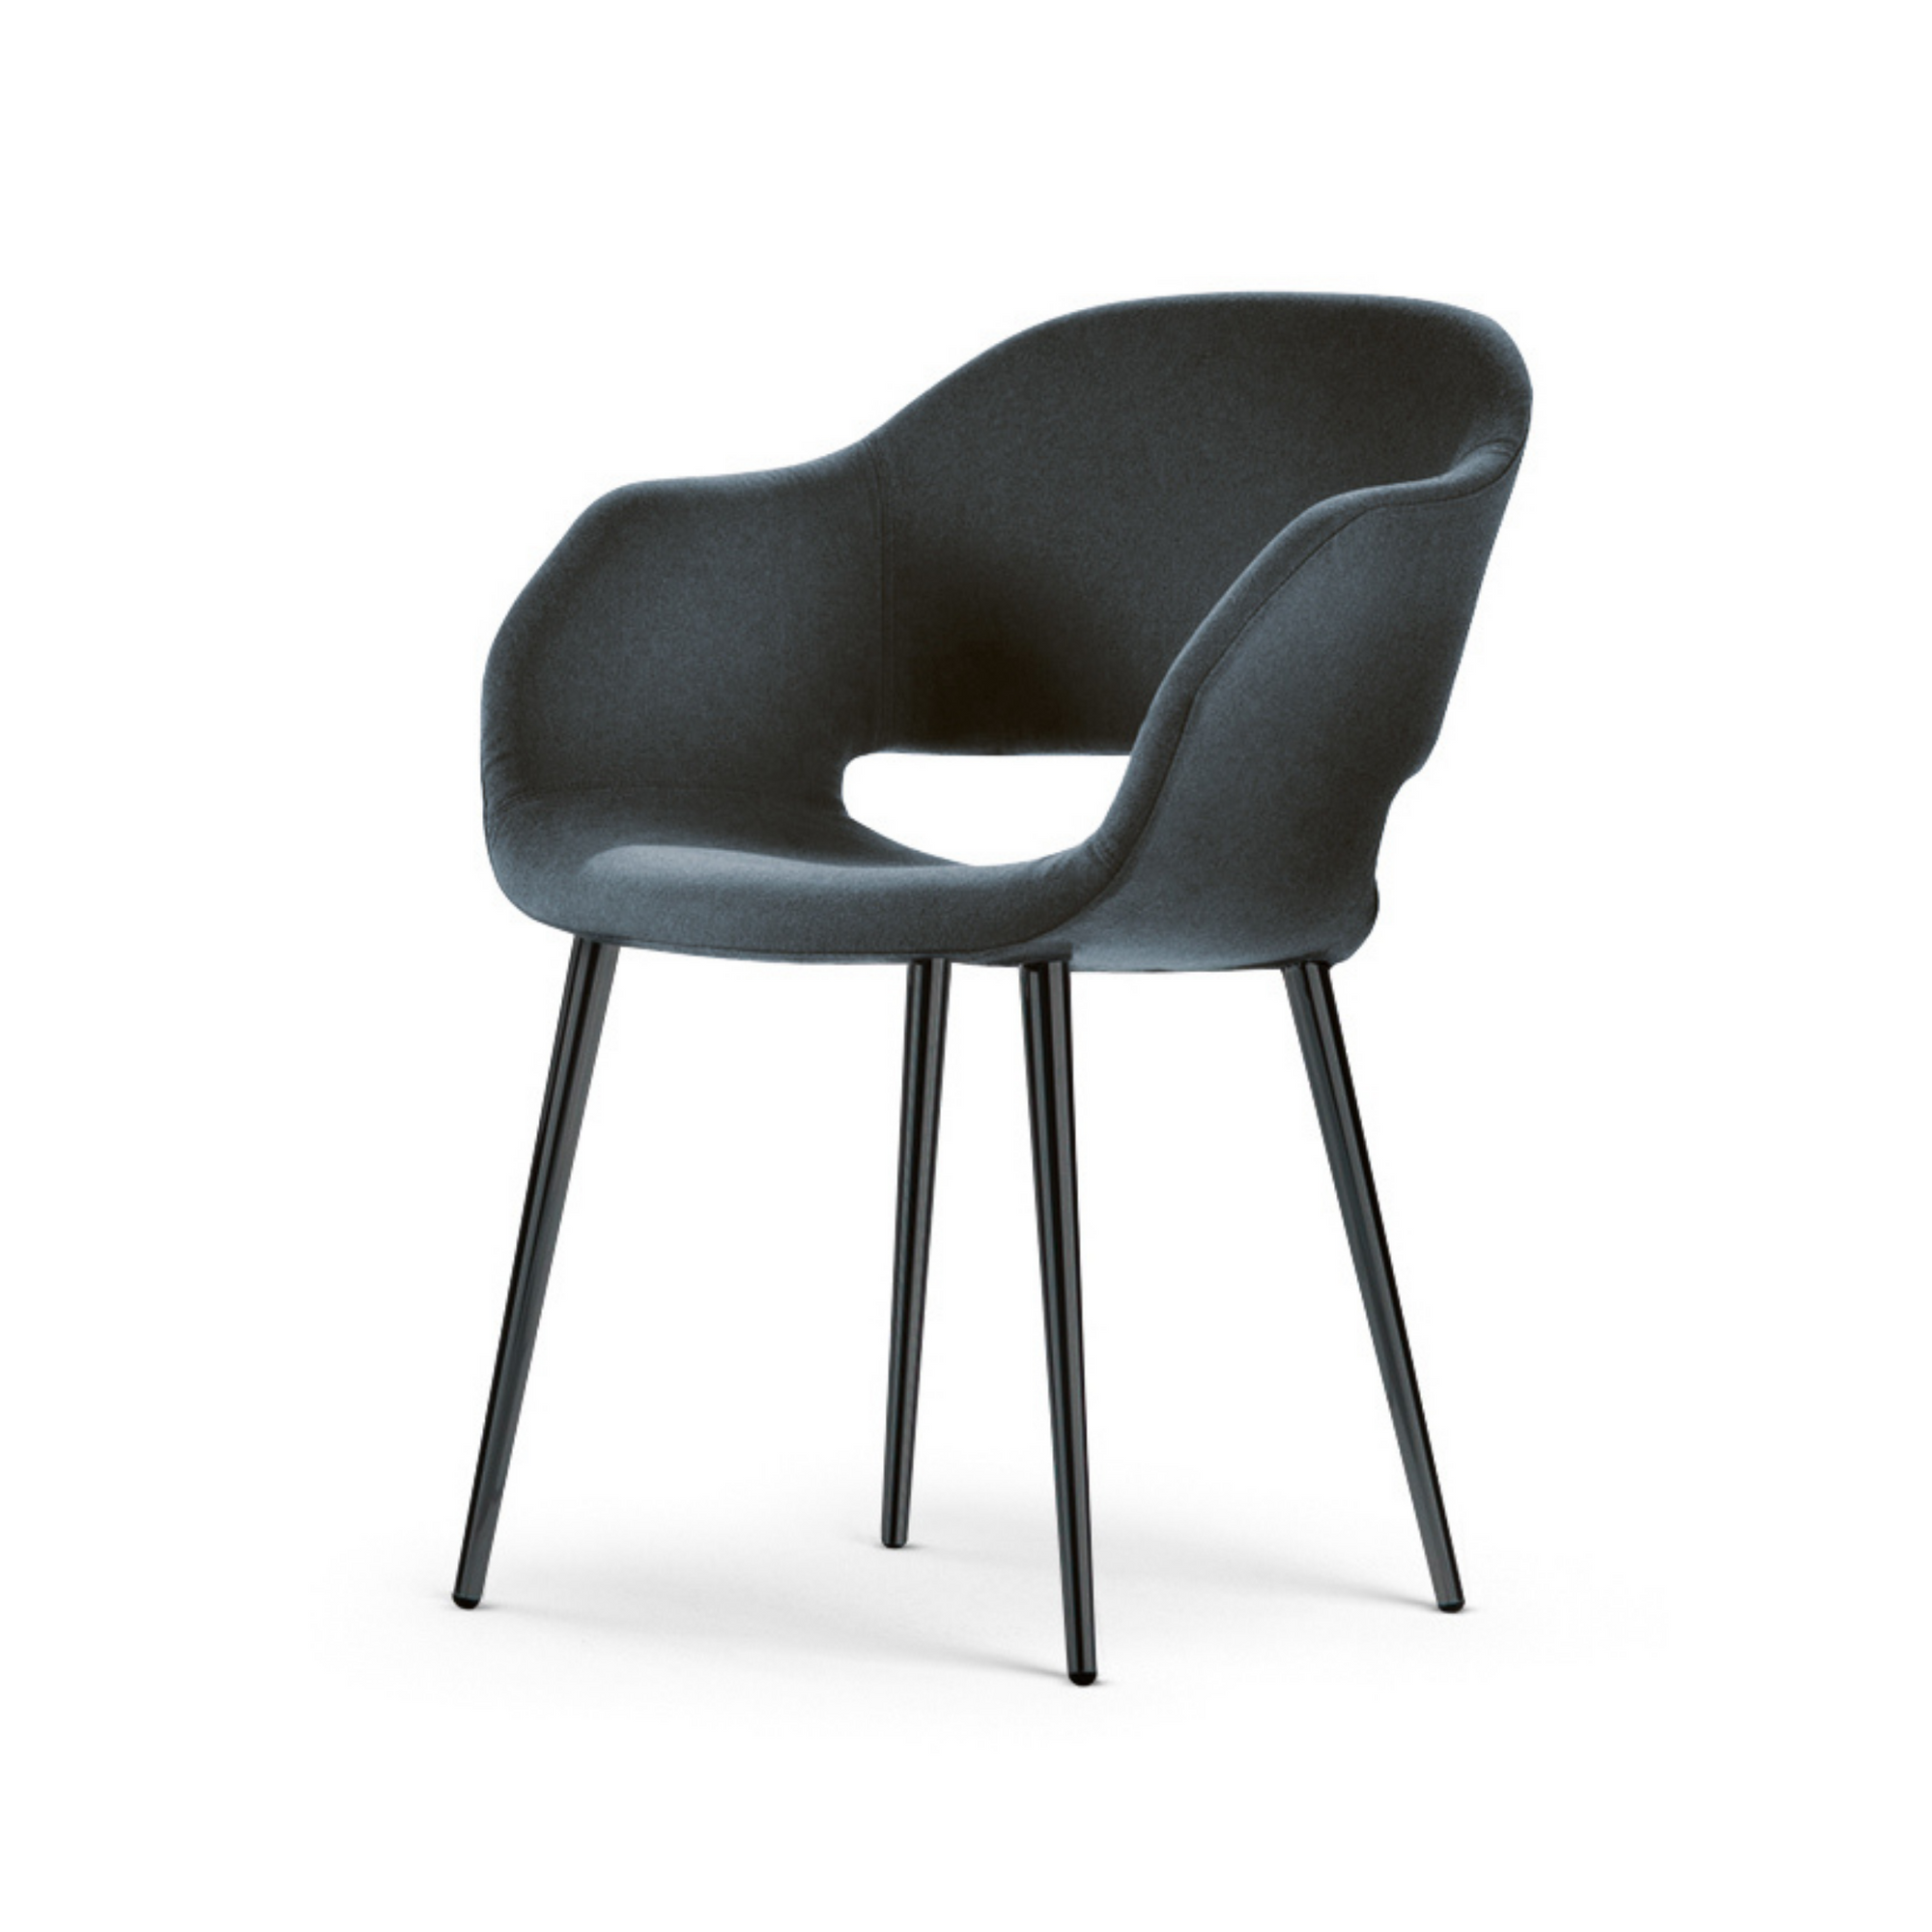 Charme armchair is characterized by an embracing volume. Upholstered in fabric or leather. Removable cover. Metal structure in metal coloured finishes or matt lacquered finishes.